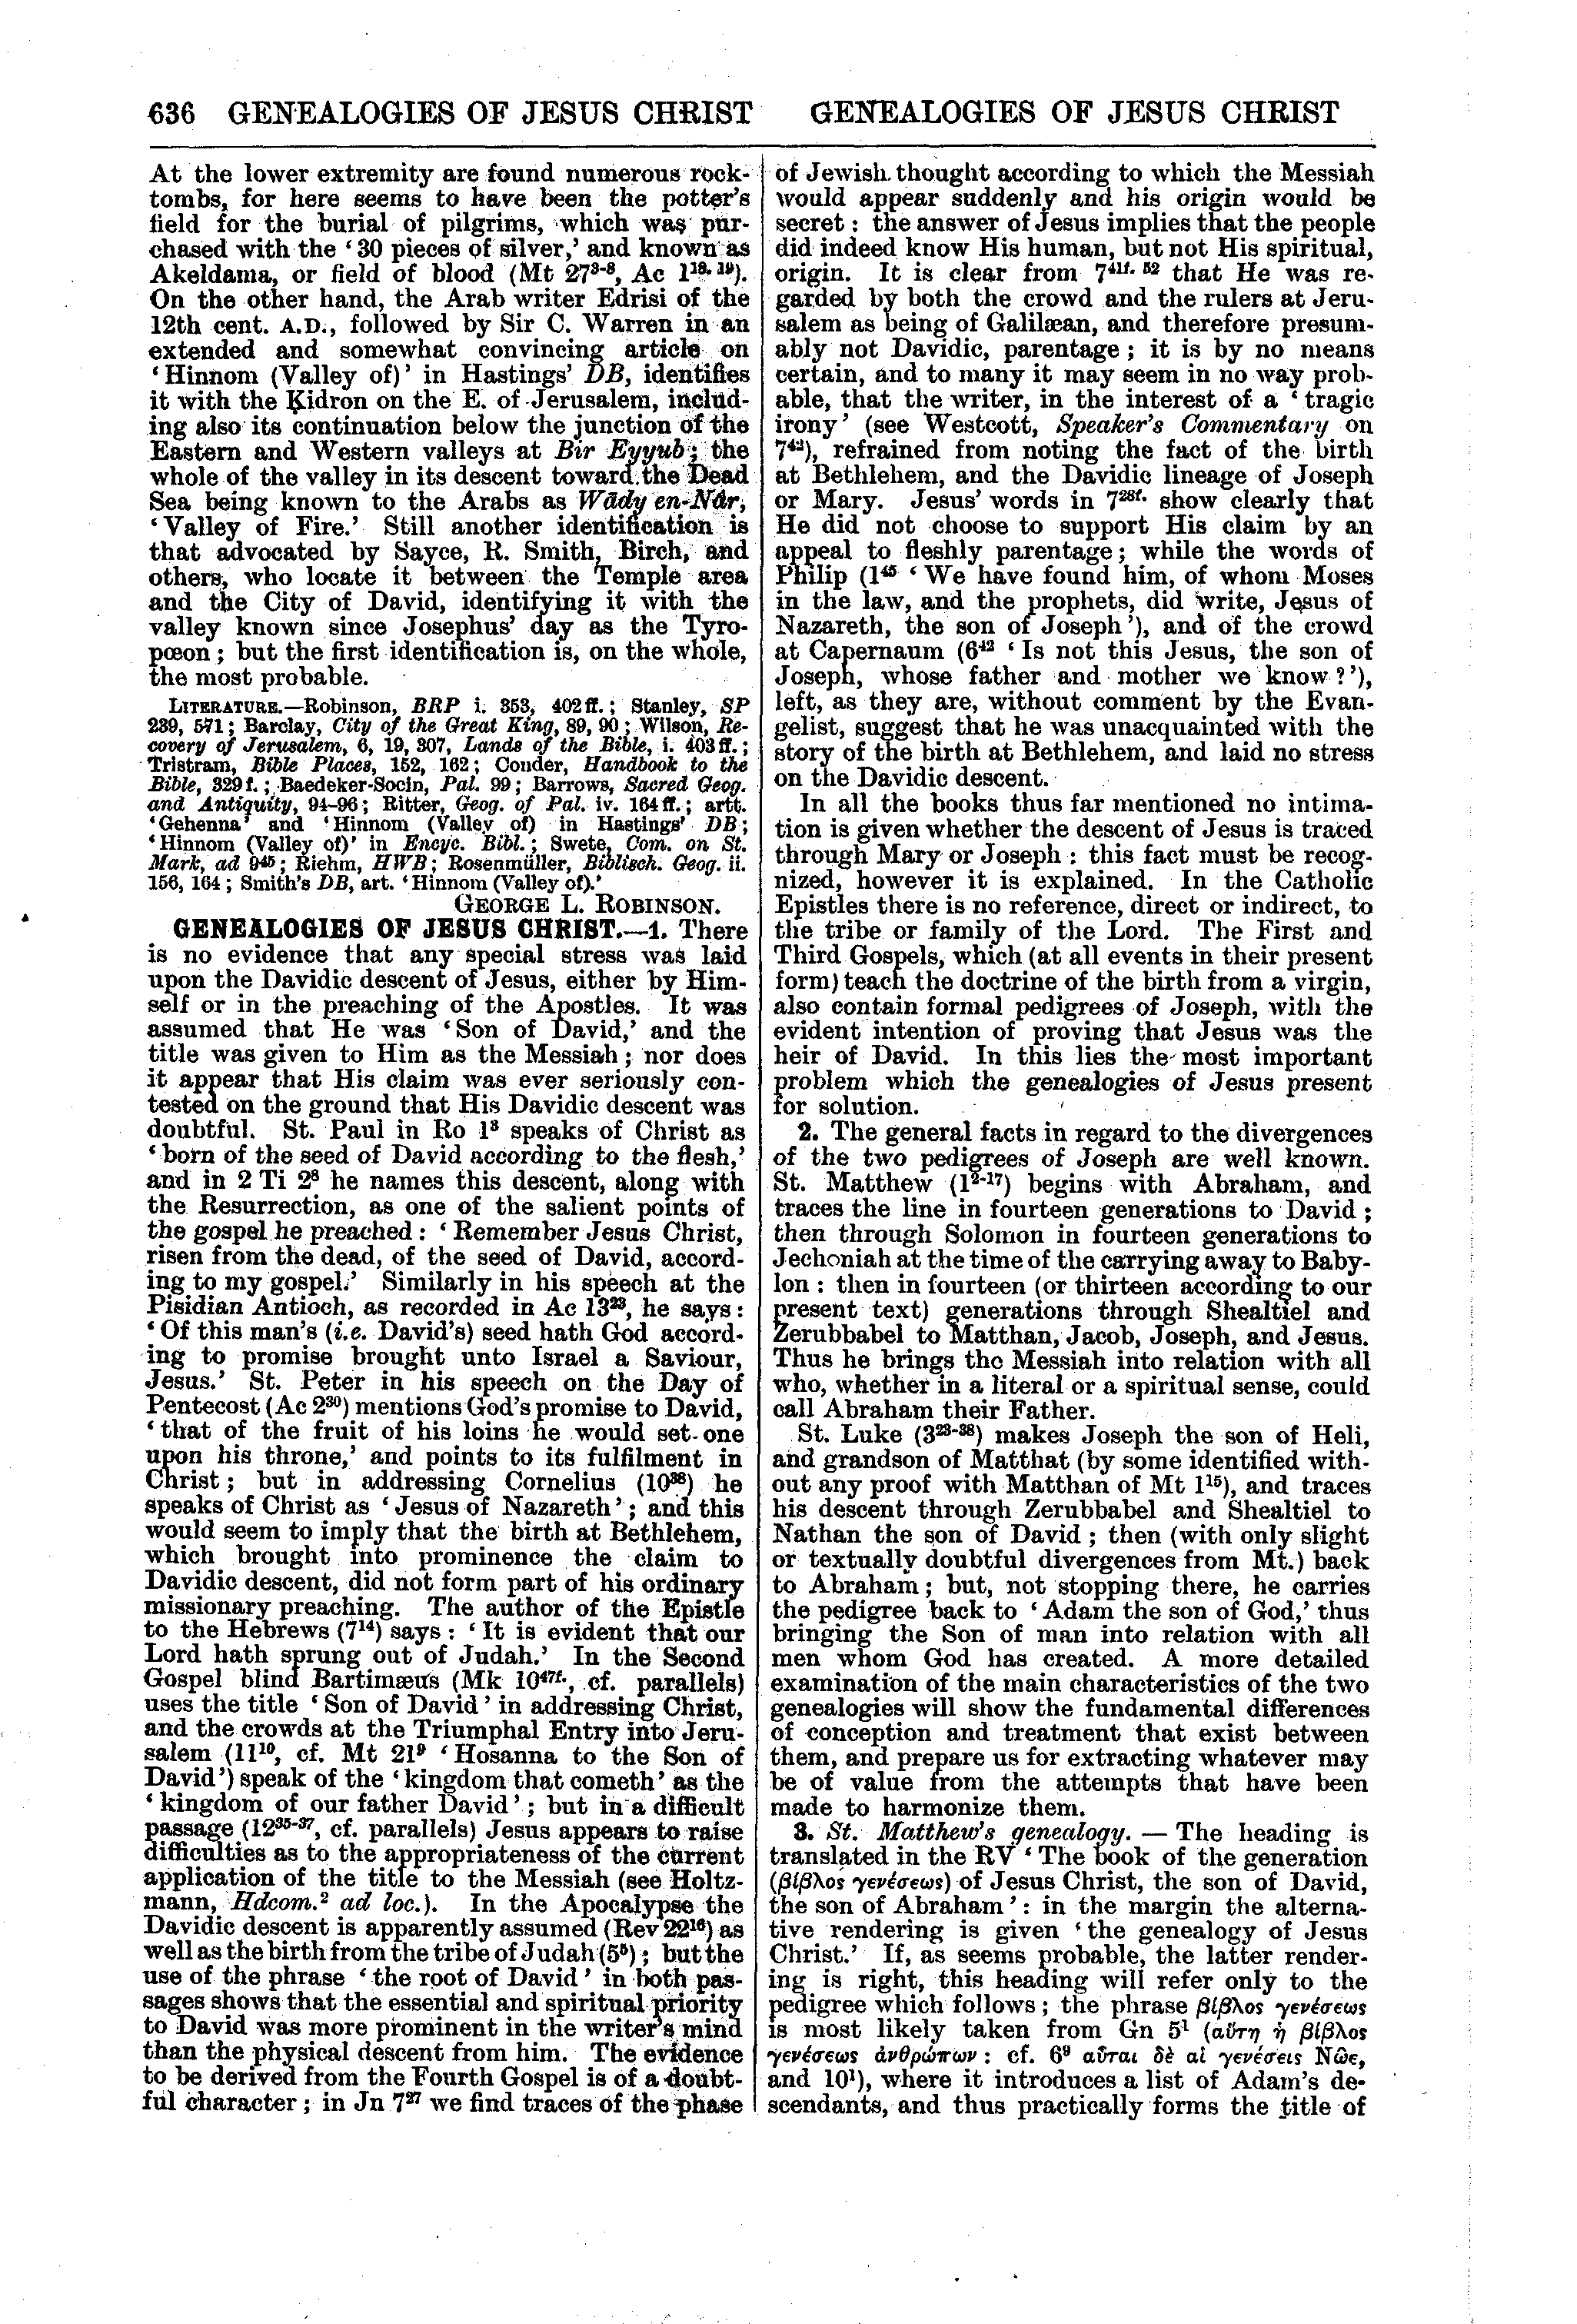 Image of page 636